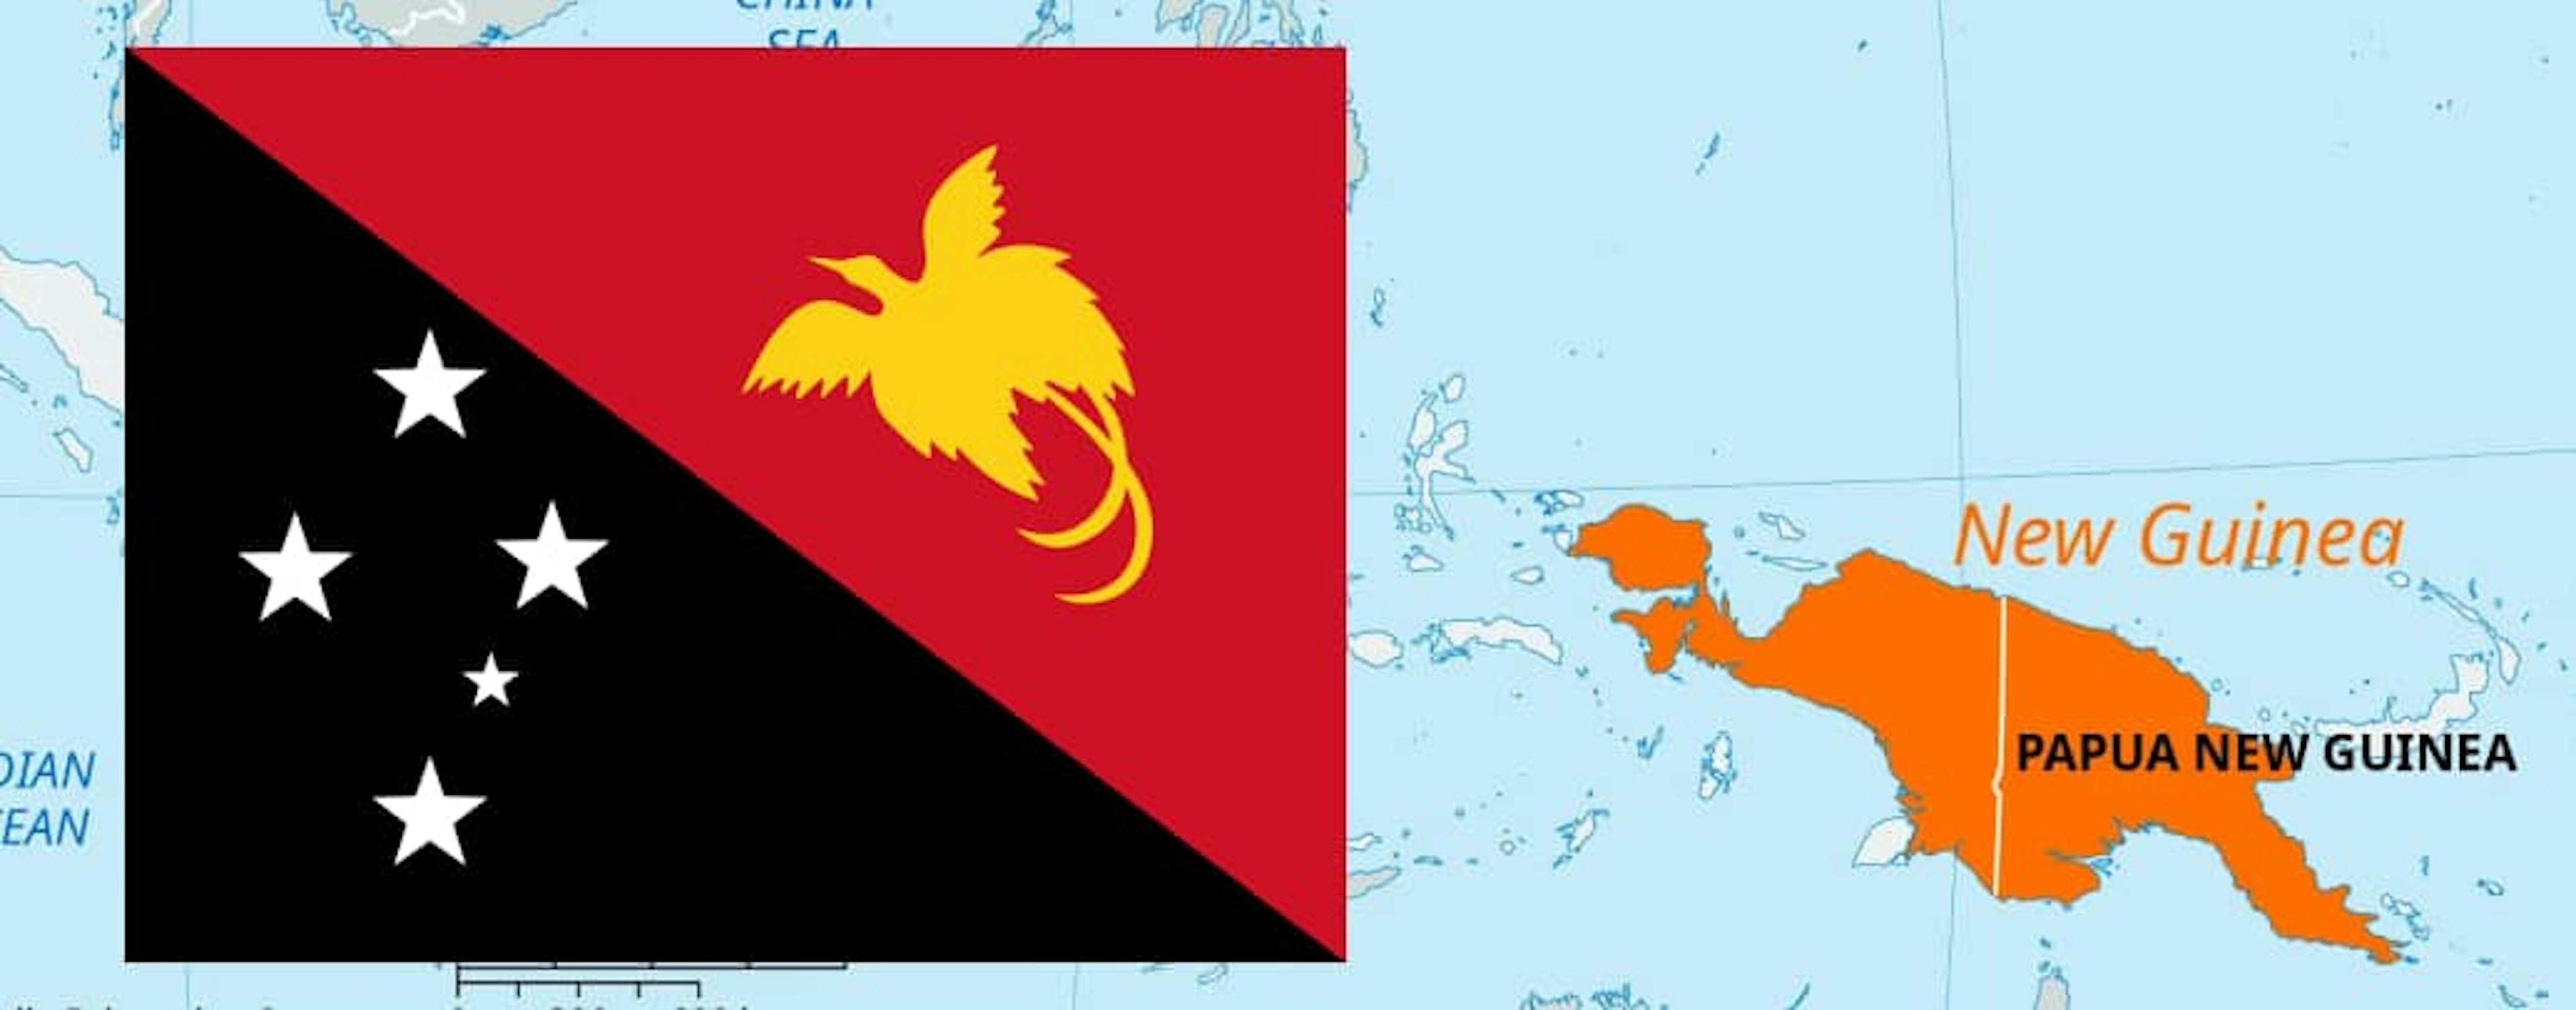 Cover Image for The Significance of the Papua New Guinea Flag - Colours, Symbols, and History